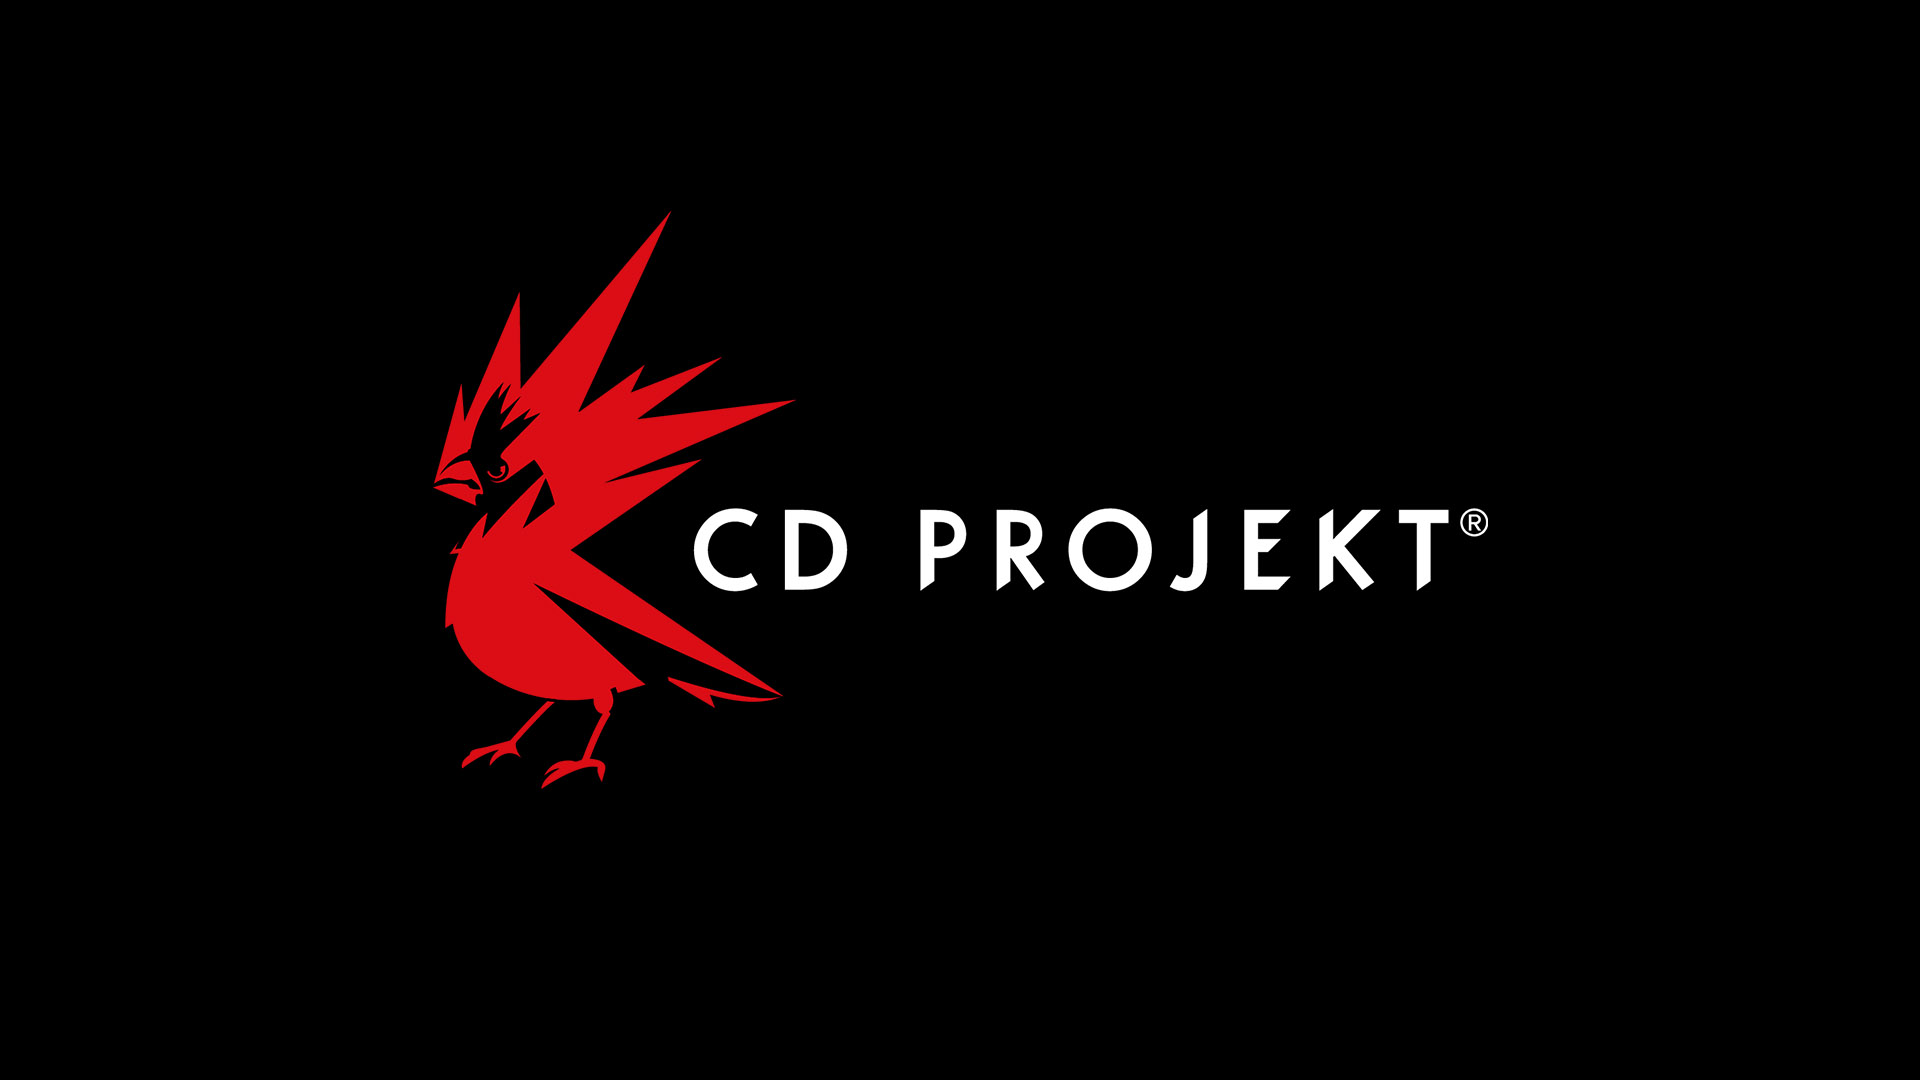 Documentary : The Story of CD Projekt Red